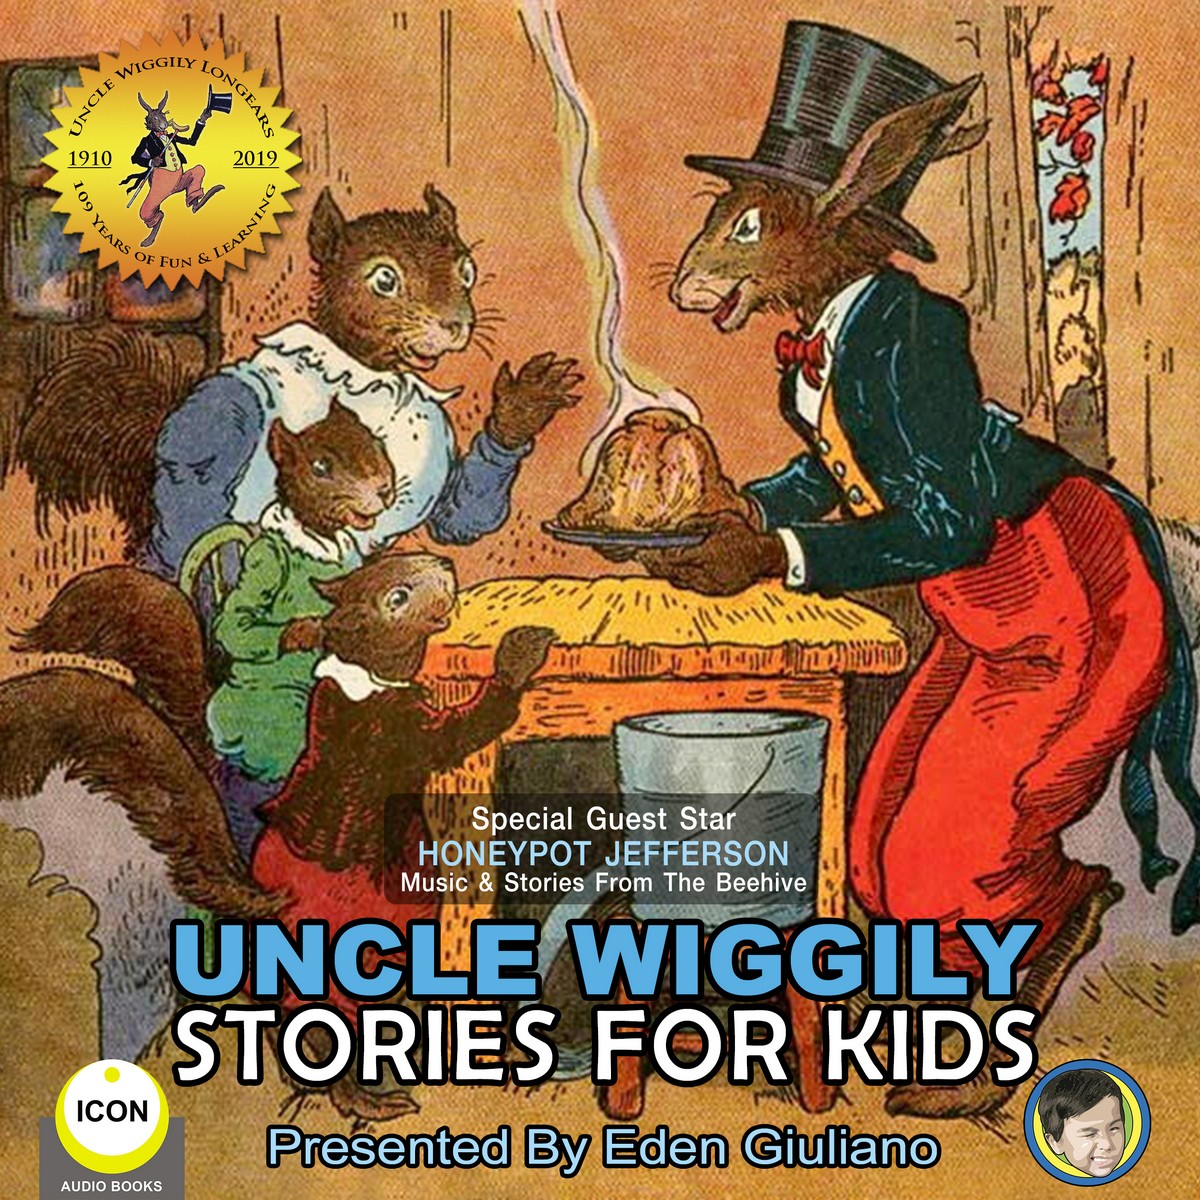 Uncle Wiggily Stories For Kids